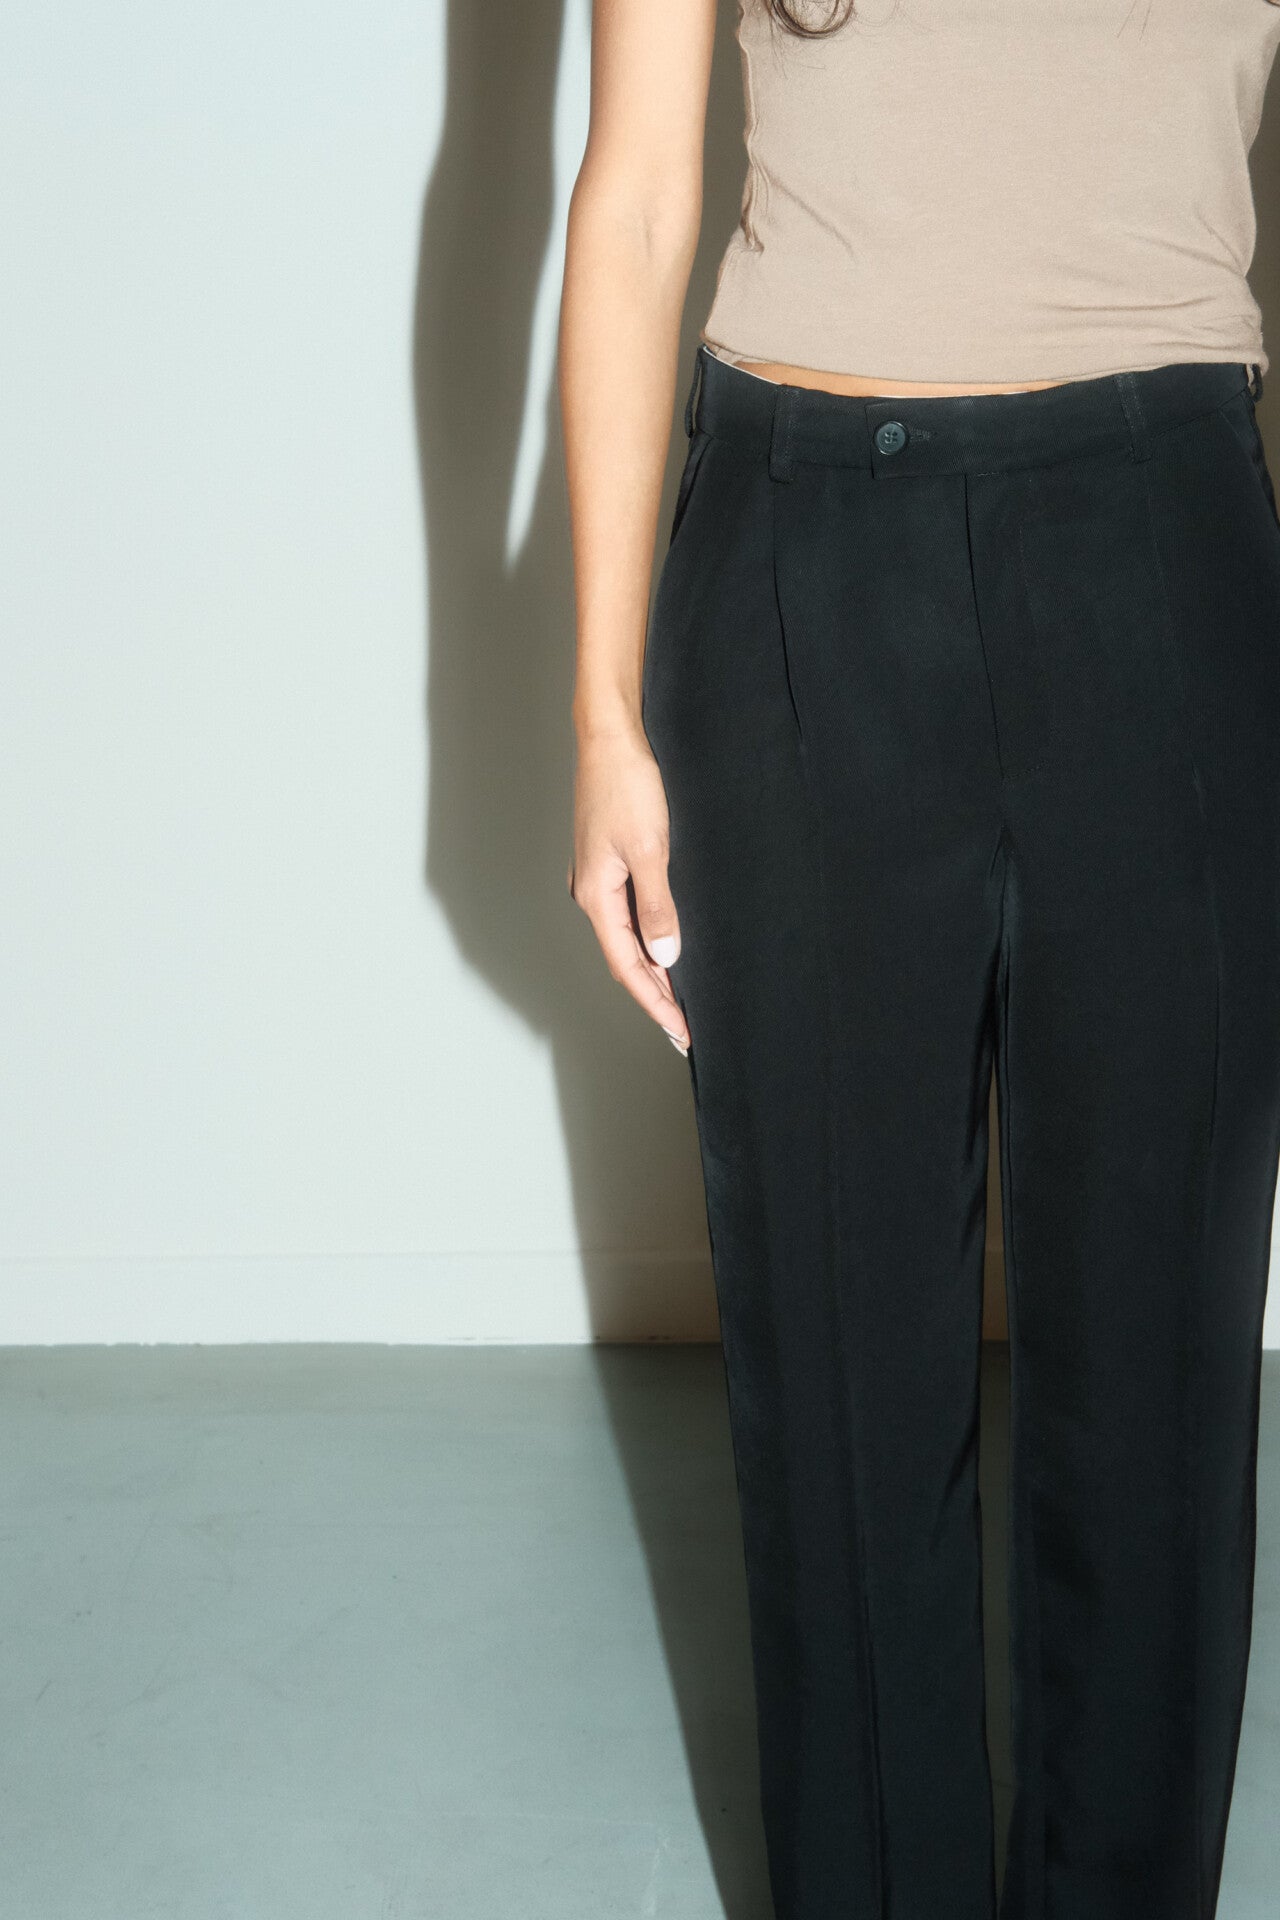 Gewand pants in fume by goutez